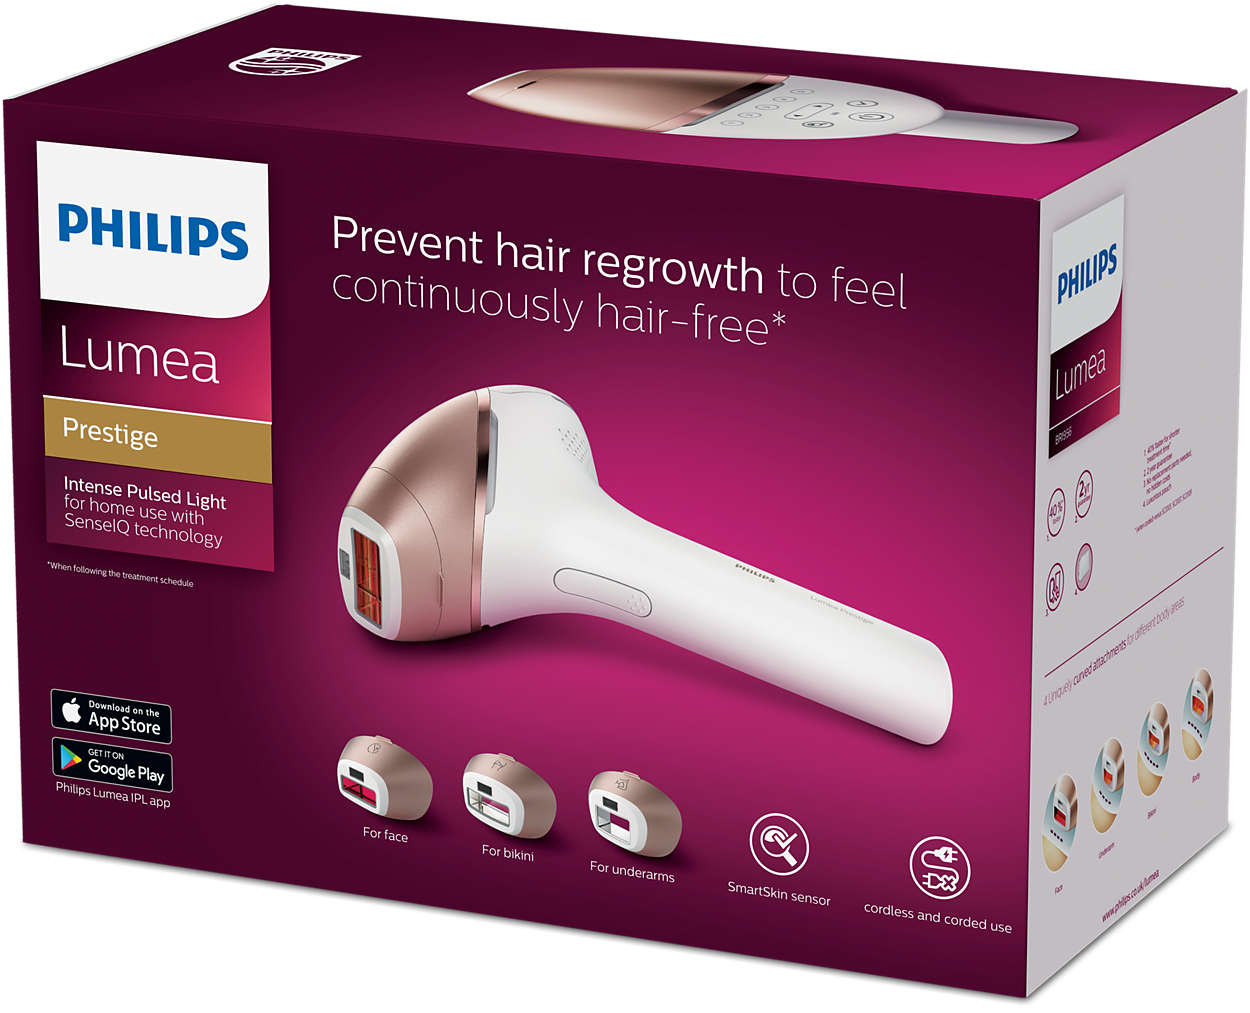 At first spoon Orchard Lumea Prestige IPL hair removal device BRI956/00 | Philips